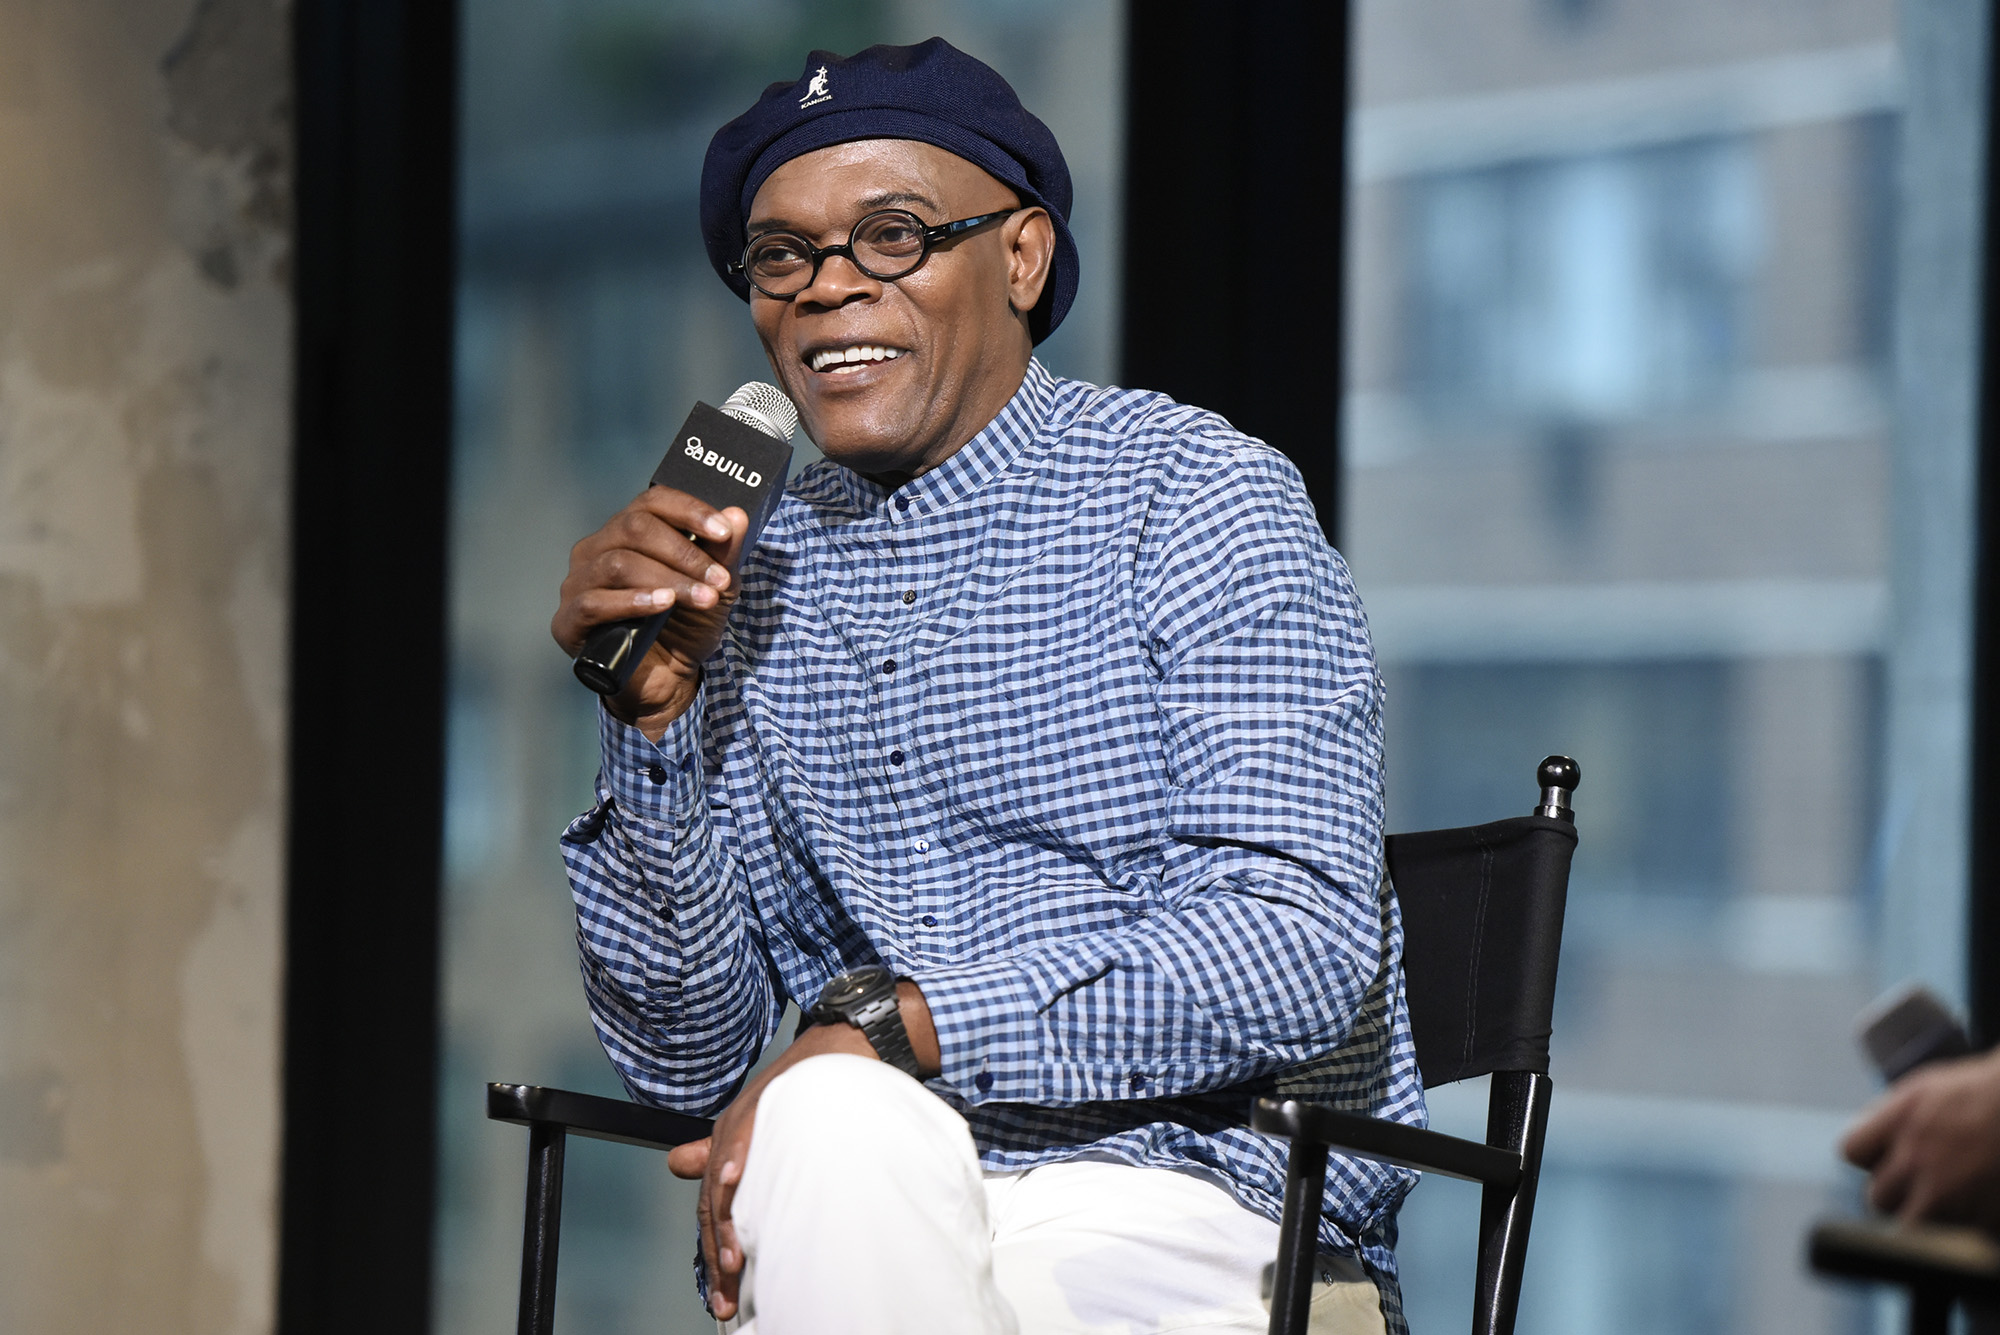 Samuel L. Jackson attends AOL Build Presents - Samuel L. Jackson from the new movie "The Legend Of Tarzan" at AOL Studios in New York on June 29, 2016 in New York City.  (Photo by Matthew Eisman/Getty Images) (Matthew Eisman&mdash;Getty Images)